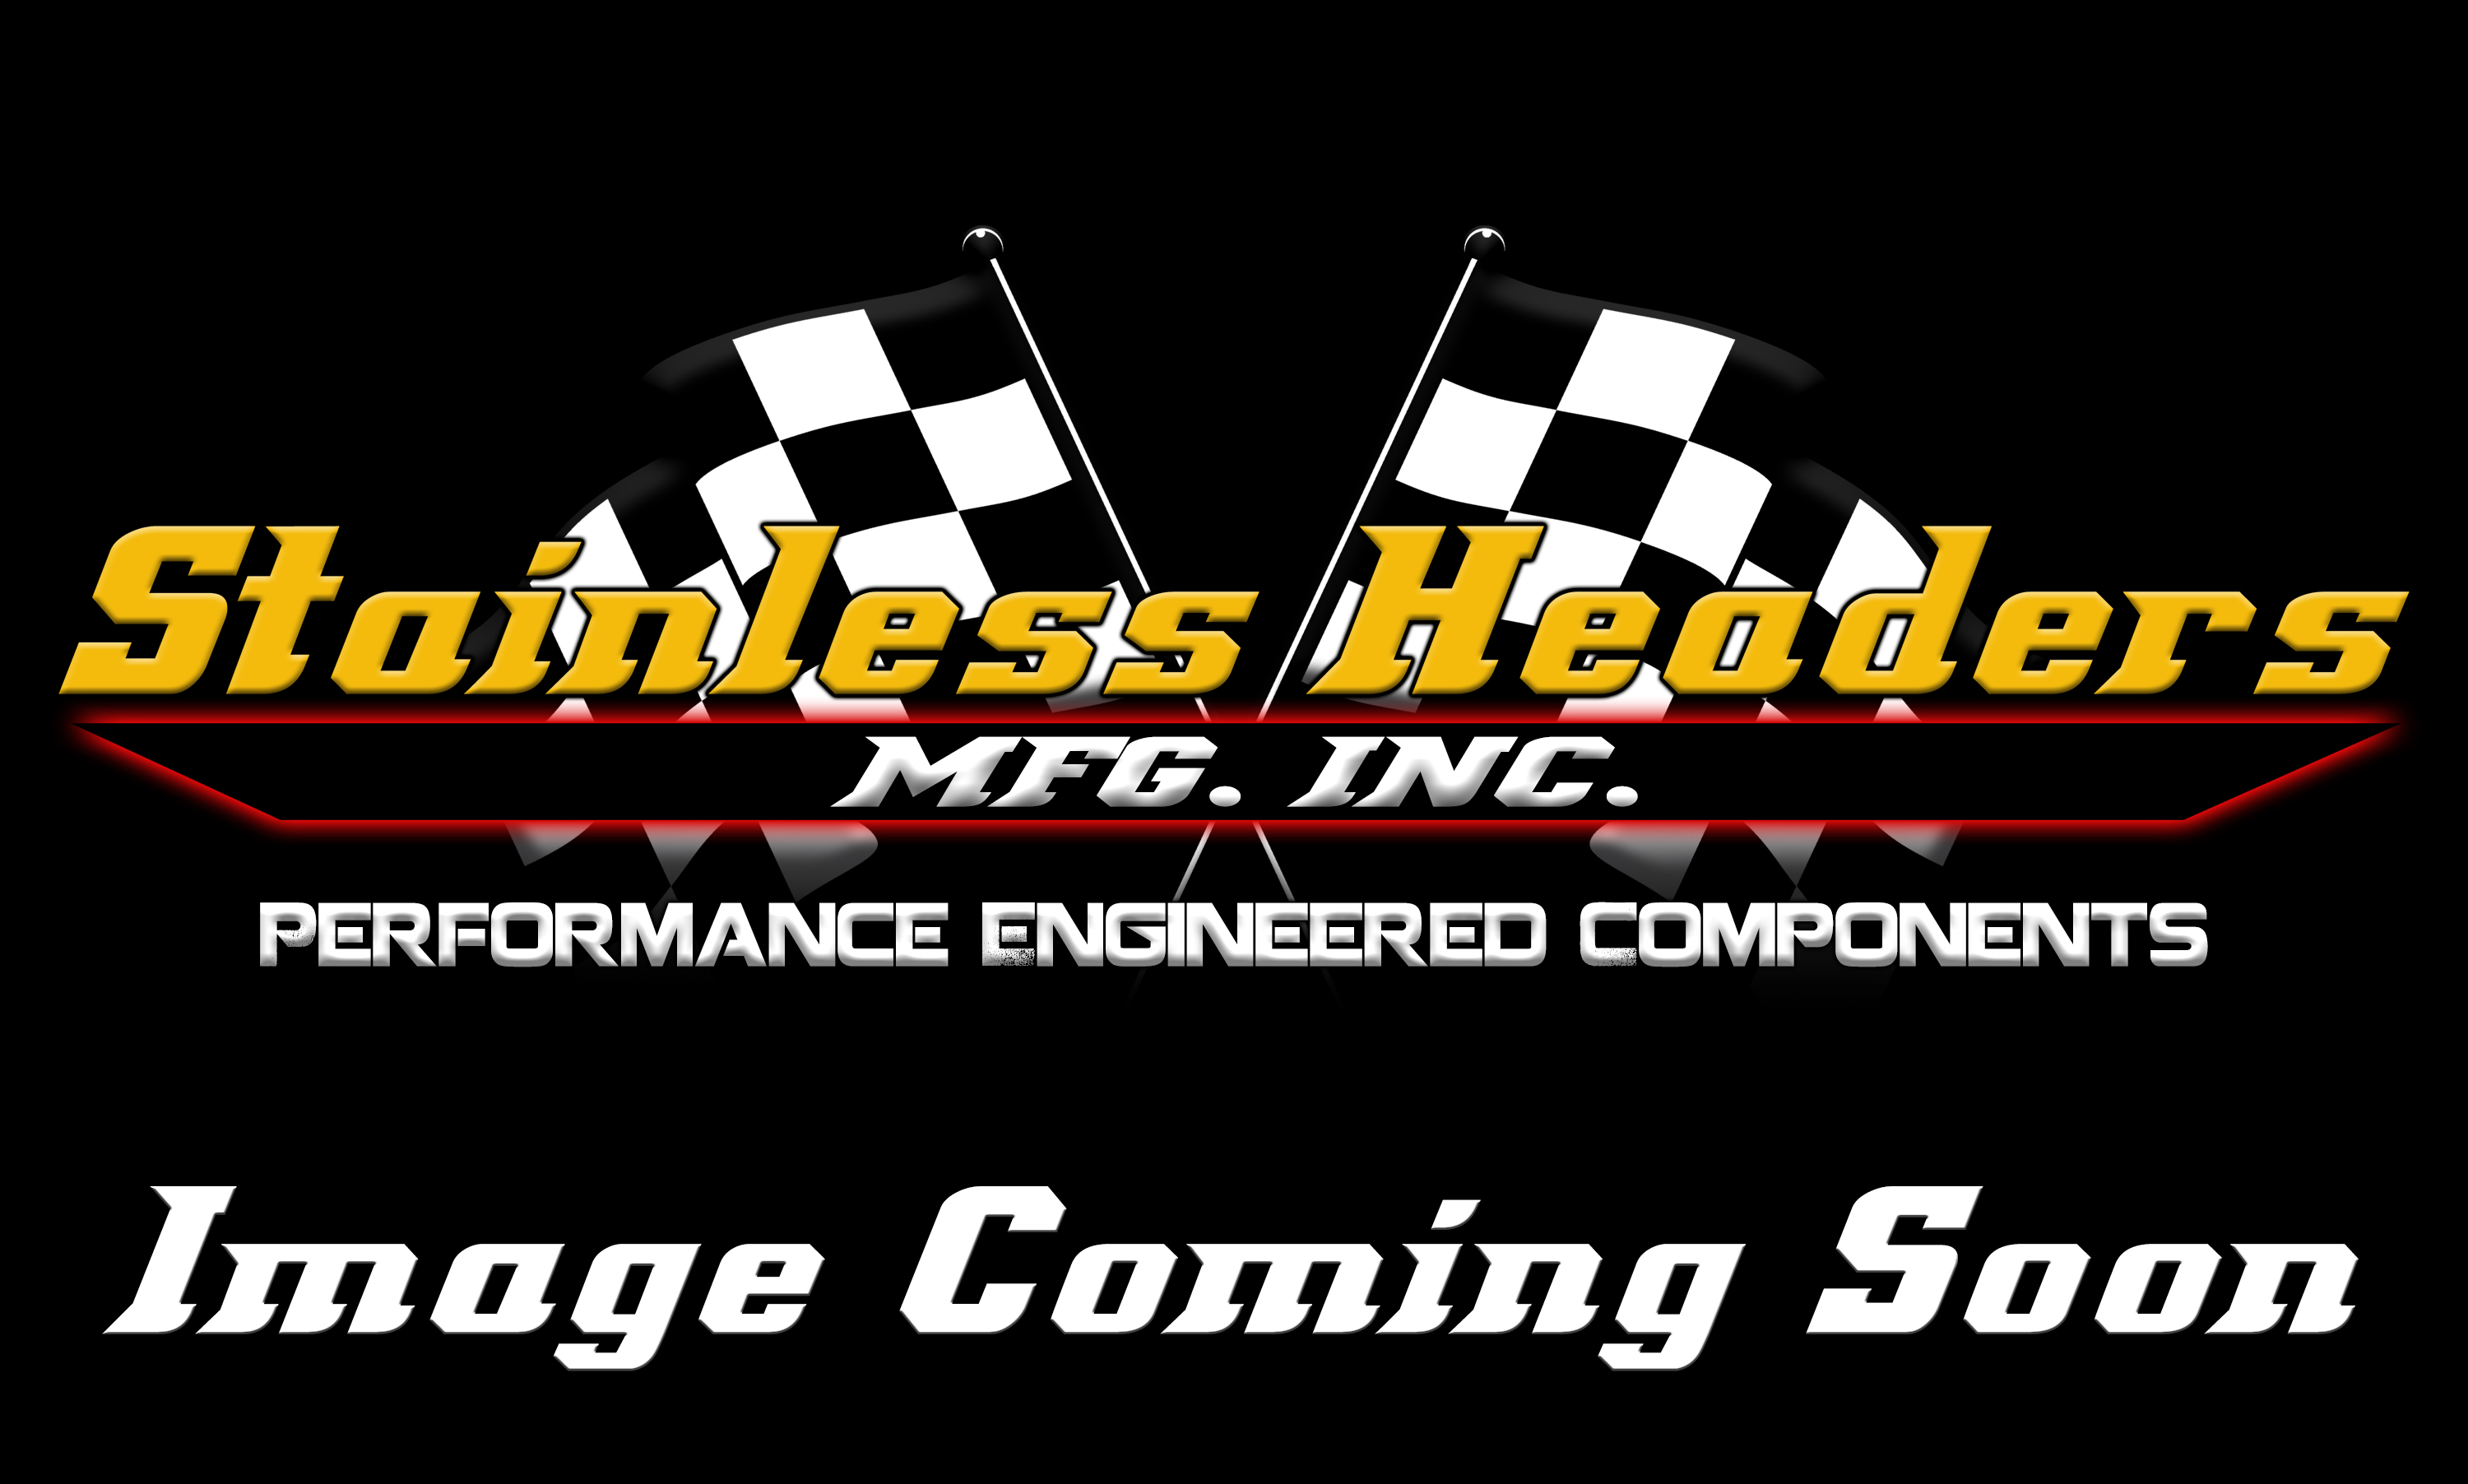 Stainless Headers - Big Block Chevy Turbo Manifold Build Kit